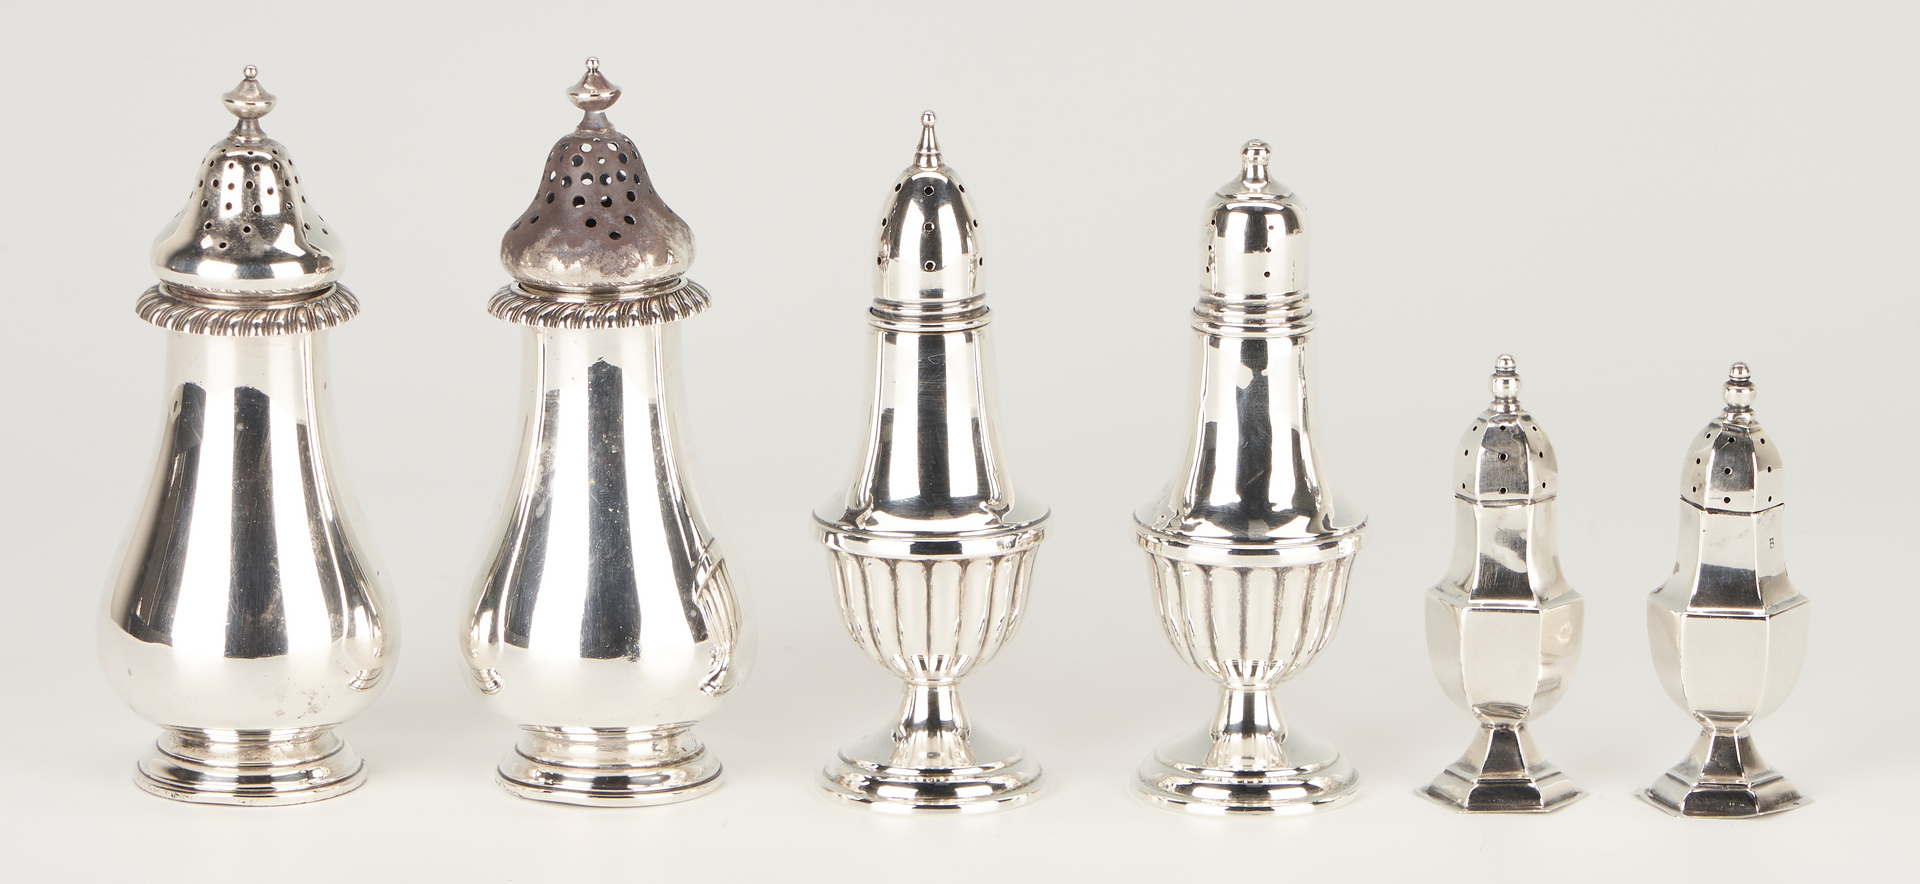 Lot 1239: 30 pcs Sterling including Salt and Pepper Shakers